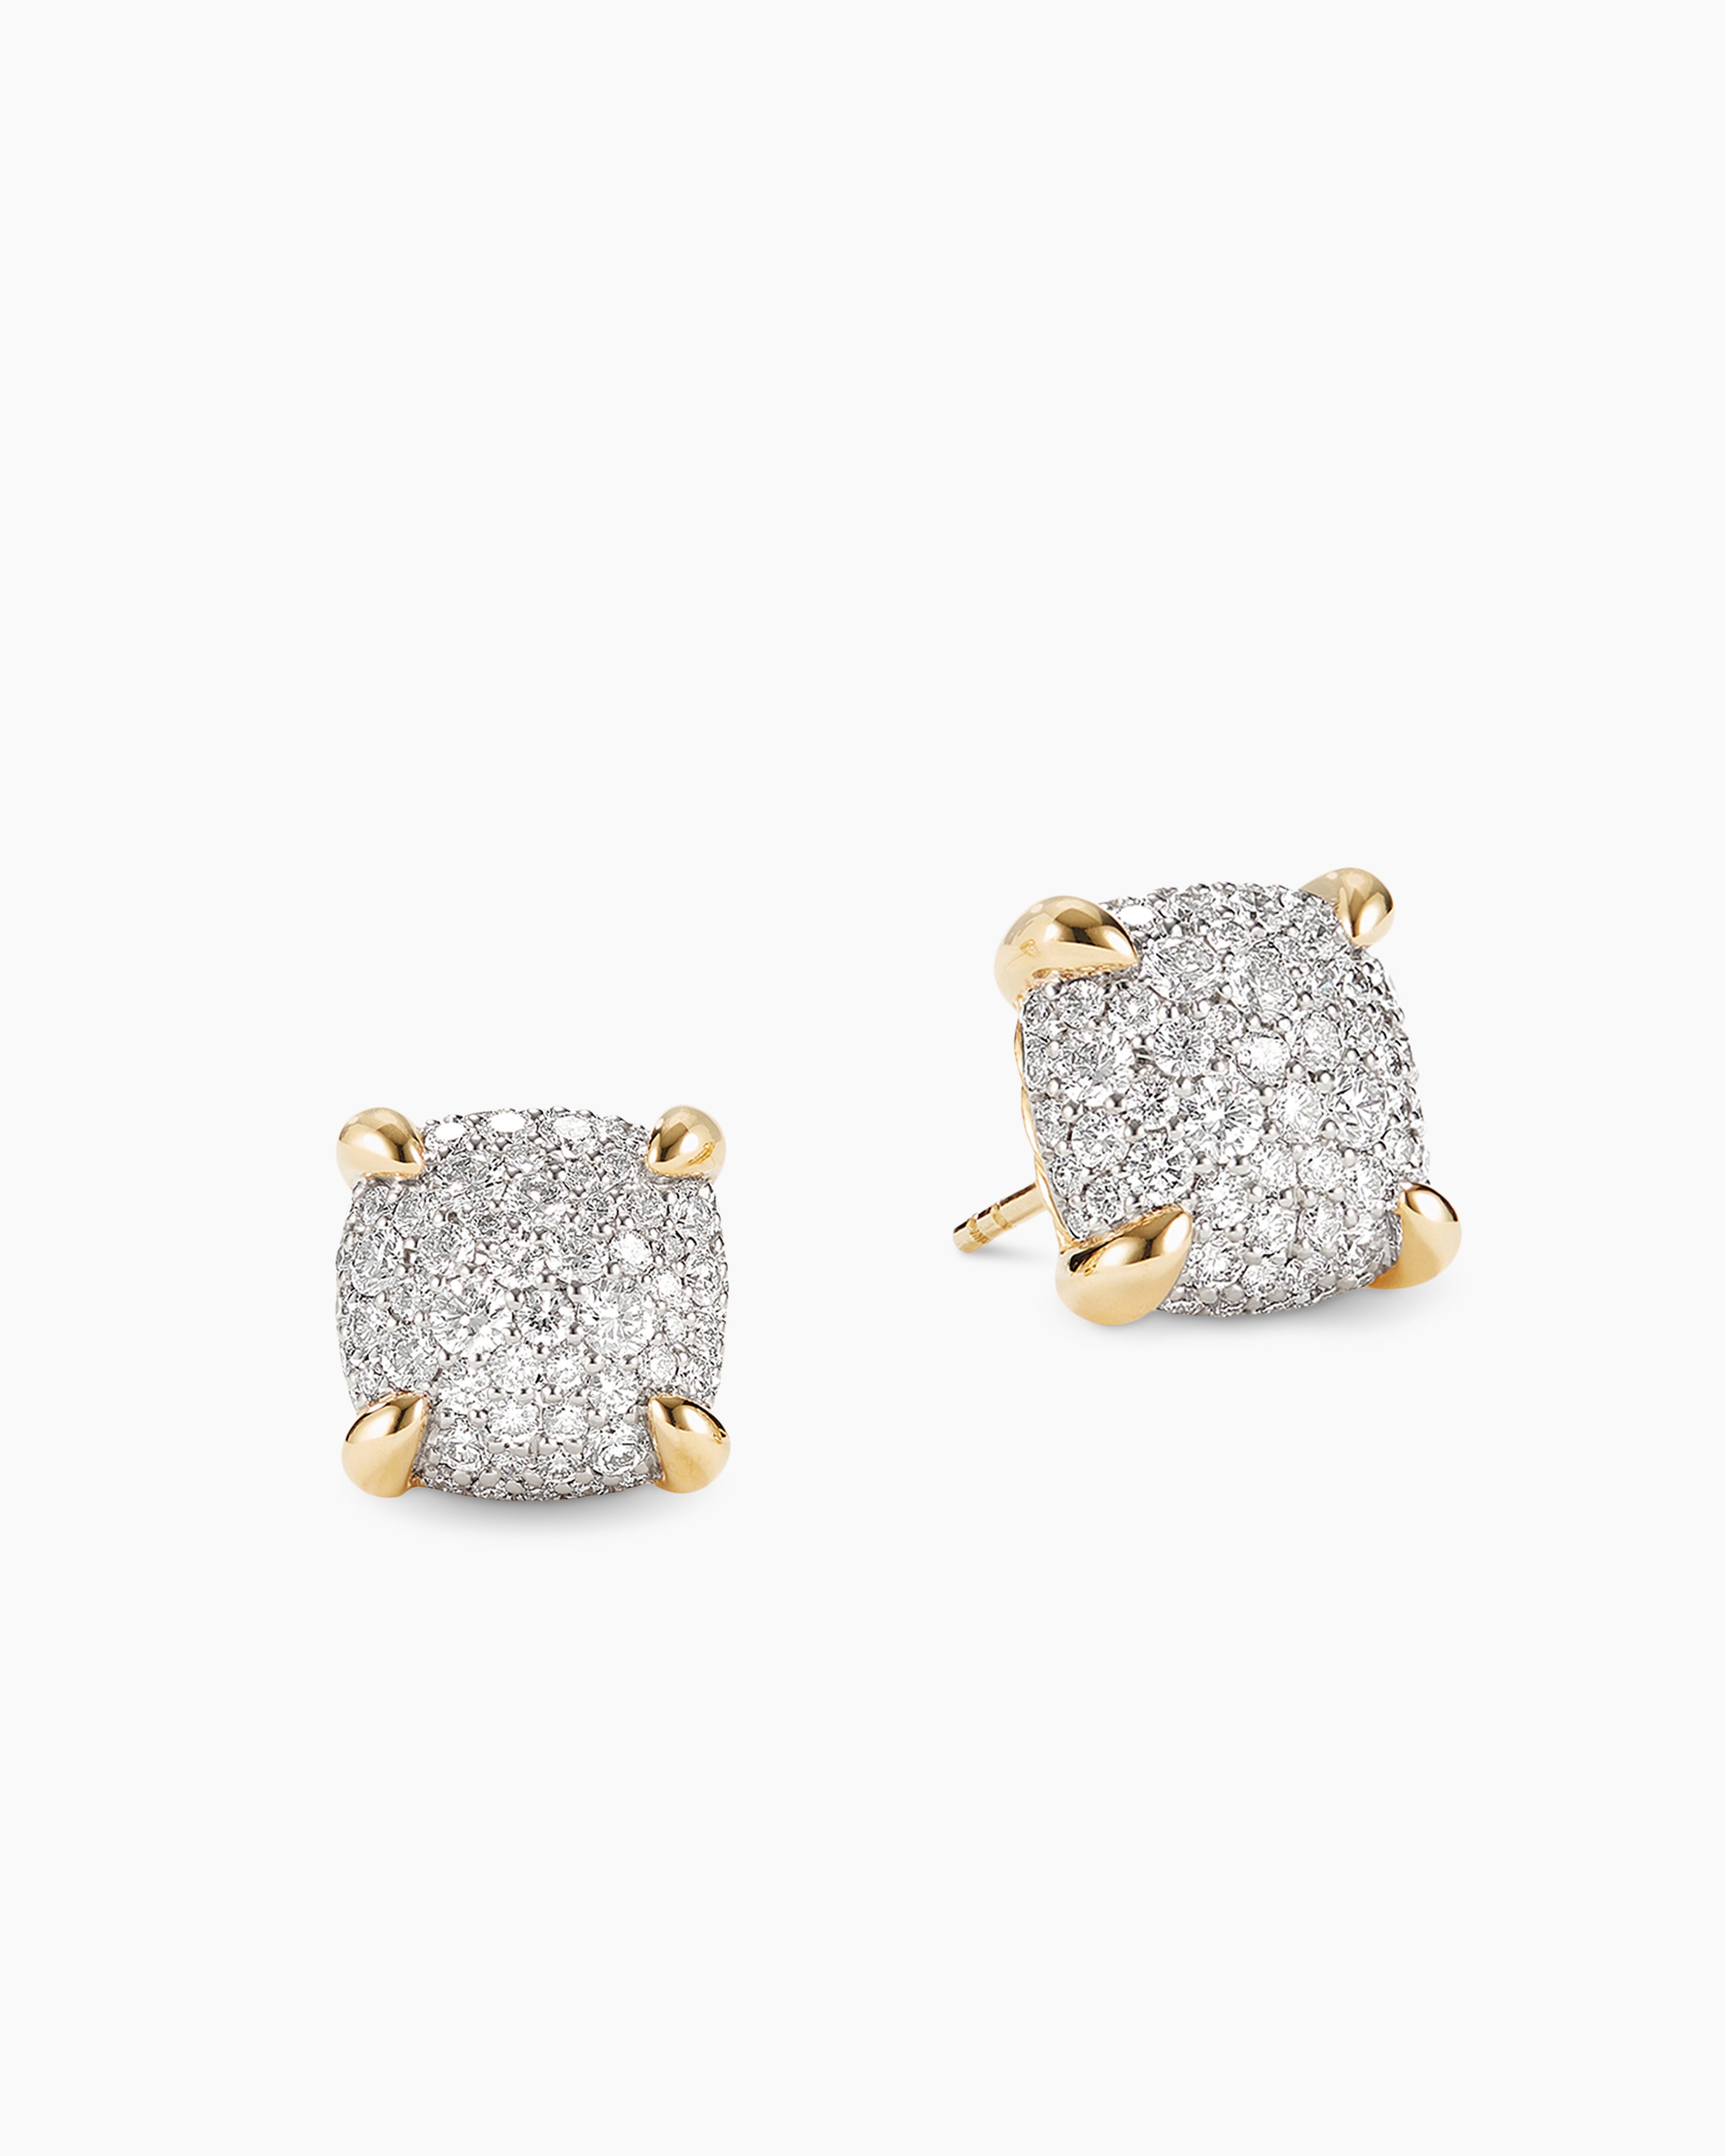 David Yurman Chatelaine Stud Earrings in 18K Yellow Gold with Full Pave Diamonds